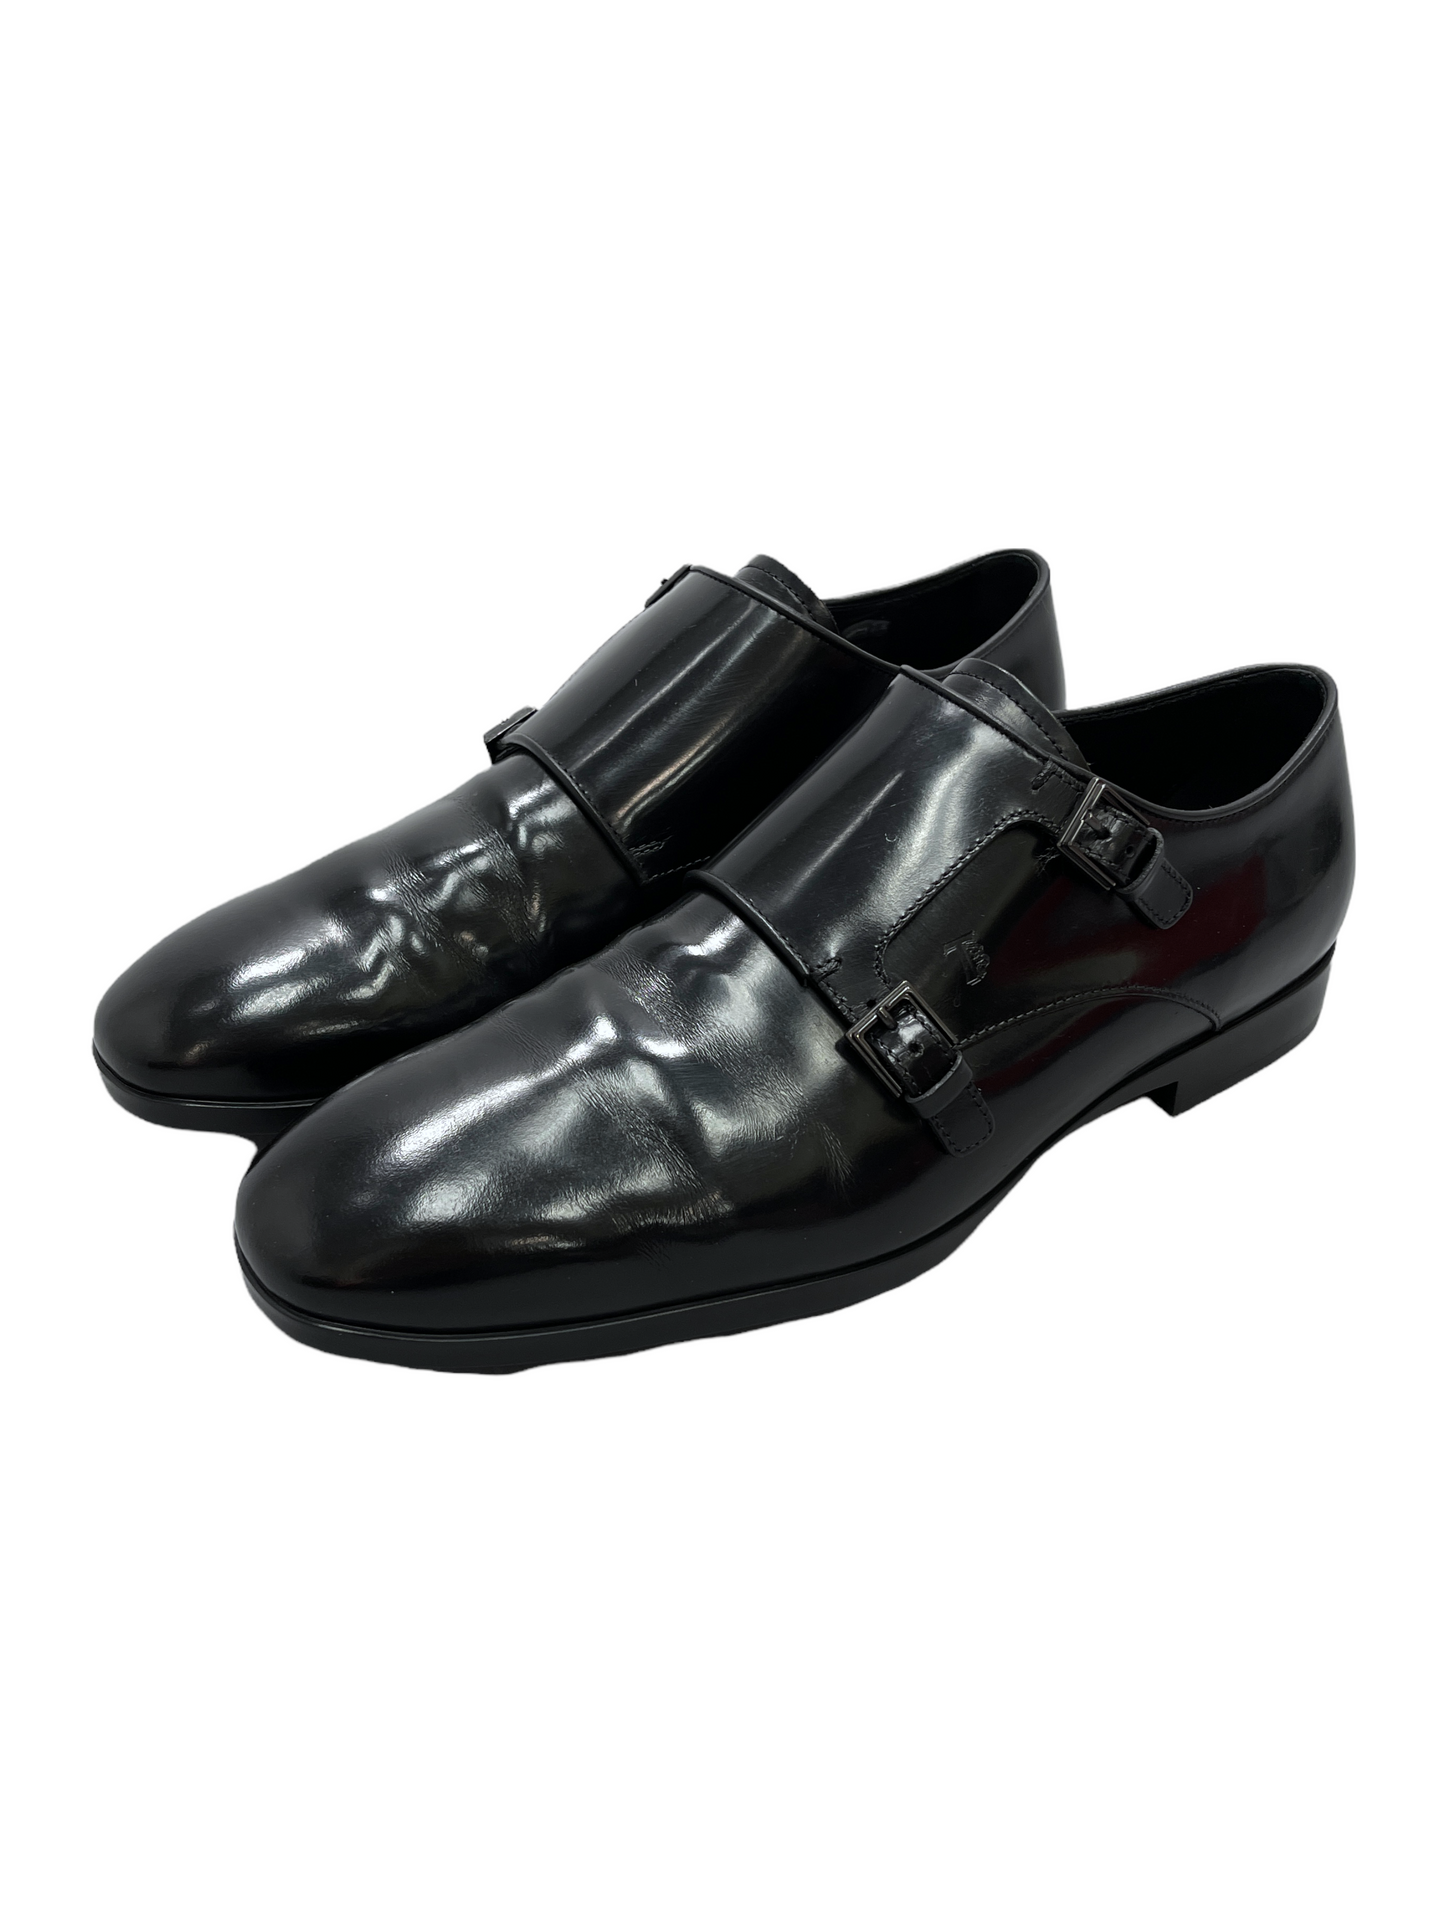 Tods Black Leather Double Monkstrap Dress Shoes 10 D US — Genuine Design luxury consignment Calgary New & pre-owned clothing, shoes, accessories.